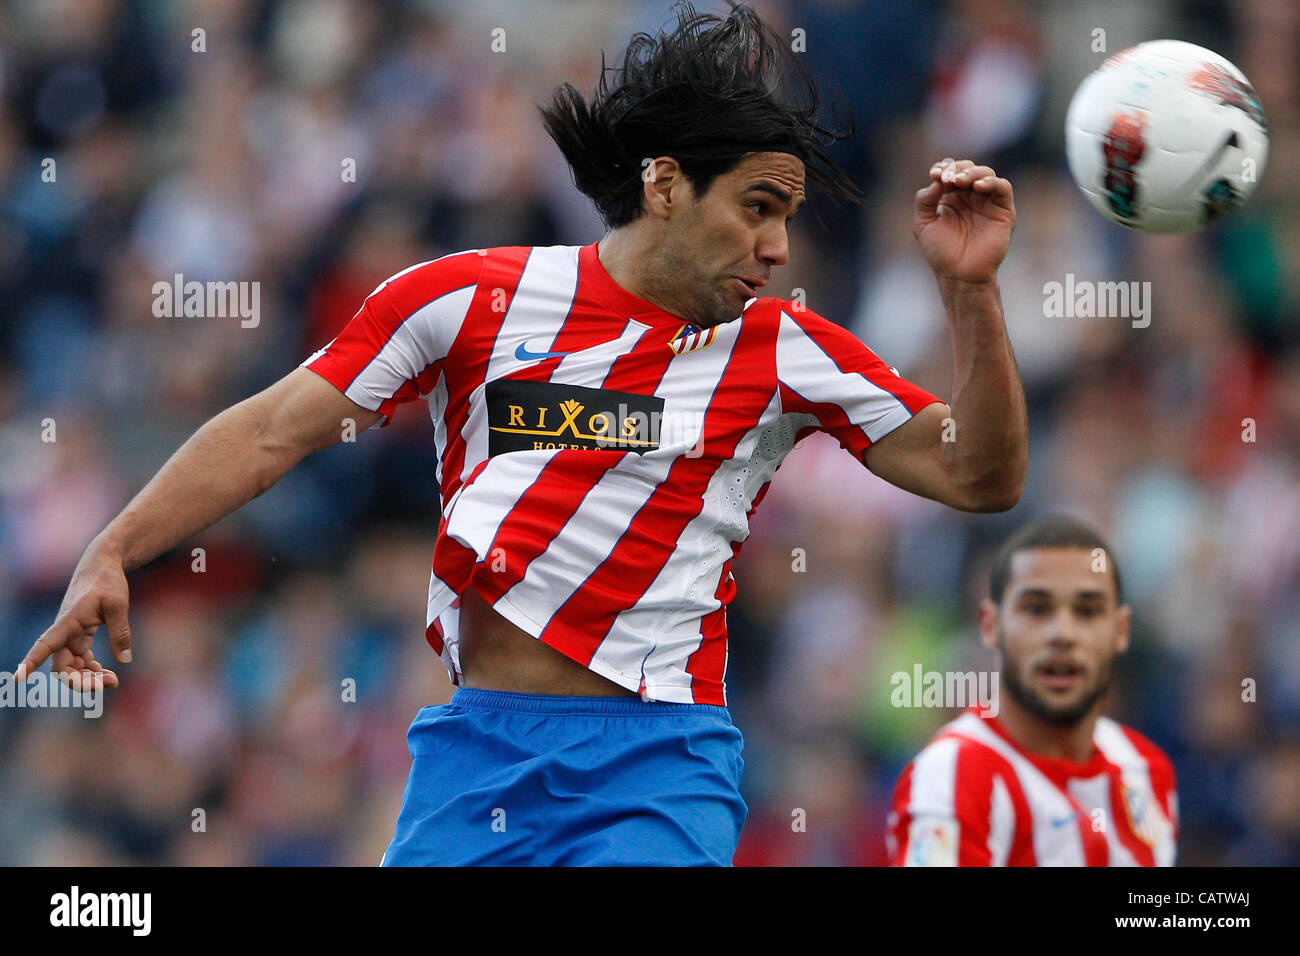 22.04.2012 MADRID, SPAIN - La Liga game  At. Madrid versus  R.C.D. Espanyol (3-1) at Vicente Calderon stadium. Picture  shows Radamel Falcao Garcia (Colombian striker of At. Madrid)  Athletico ran out winners by a score of 3-1. Stock Photo